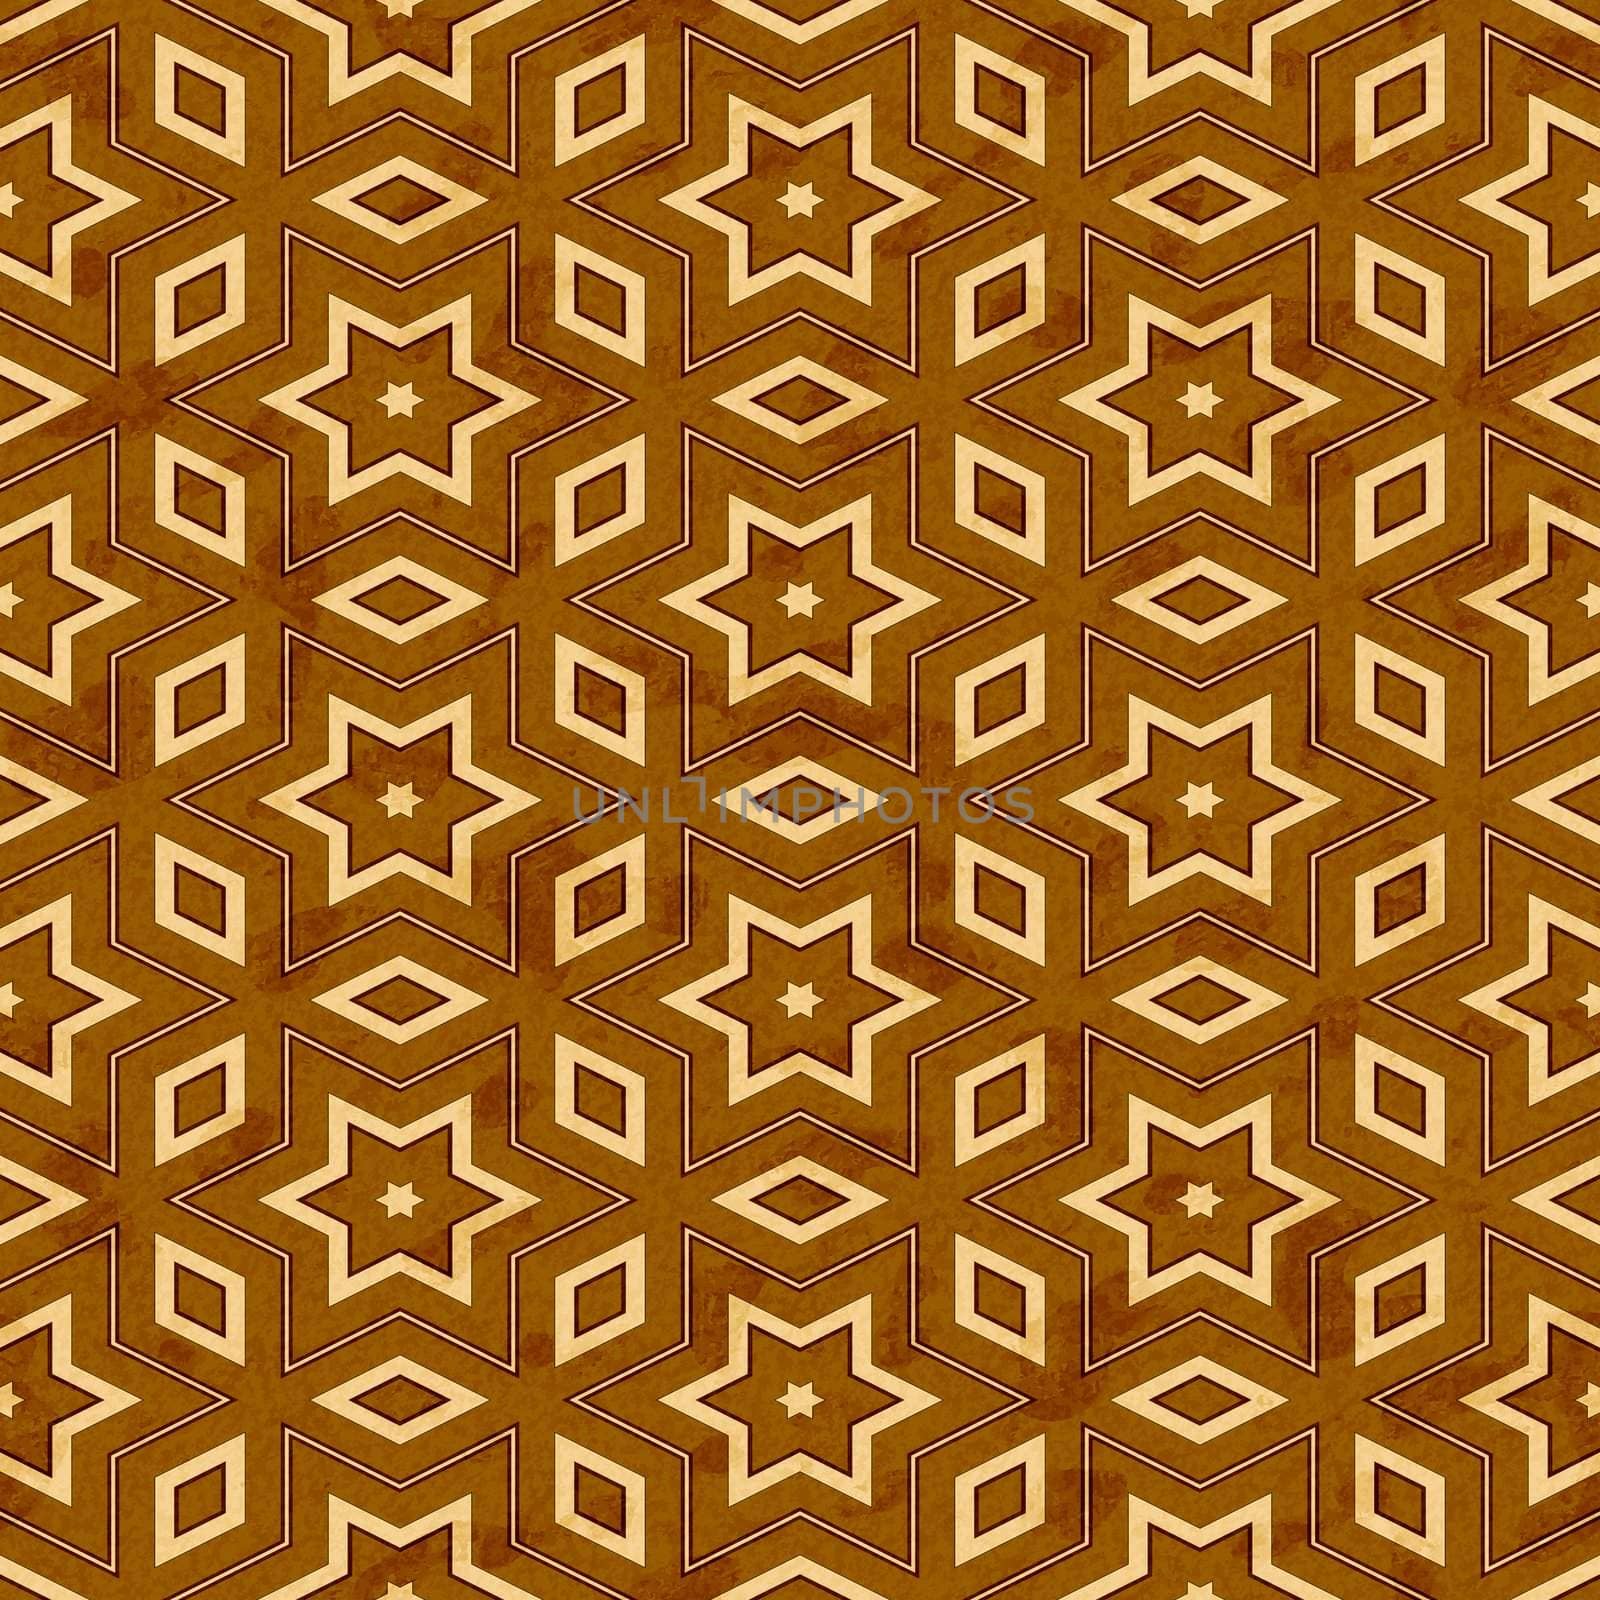 seamless texture of brown wood with yellow stars and shapes